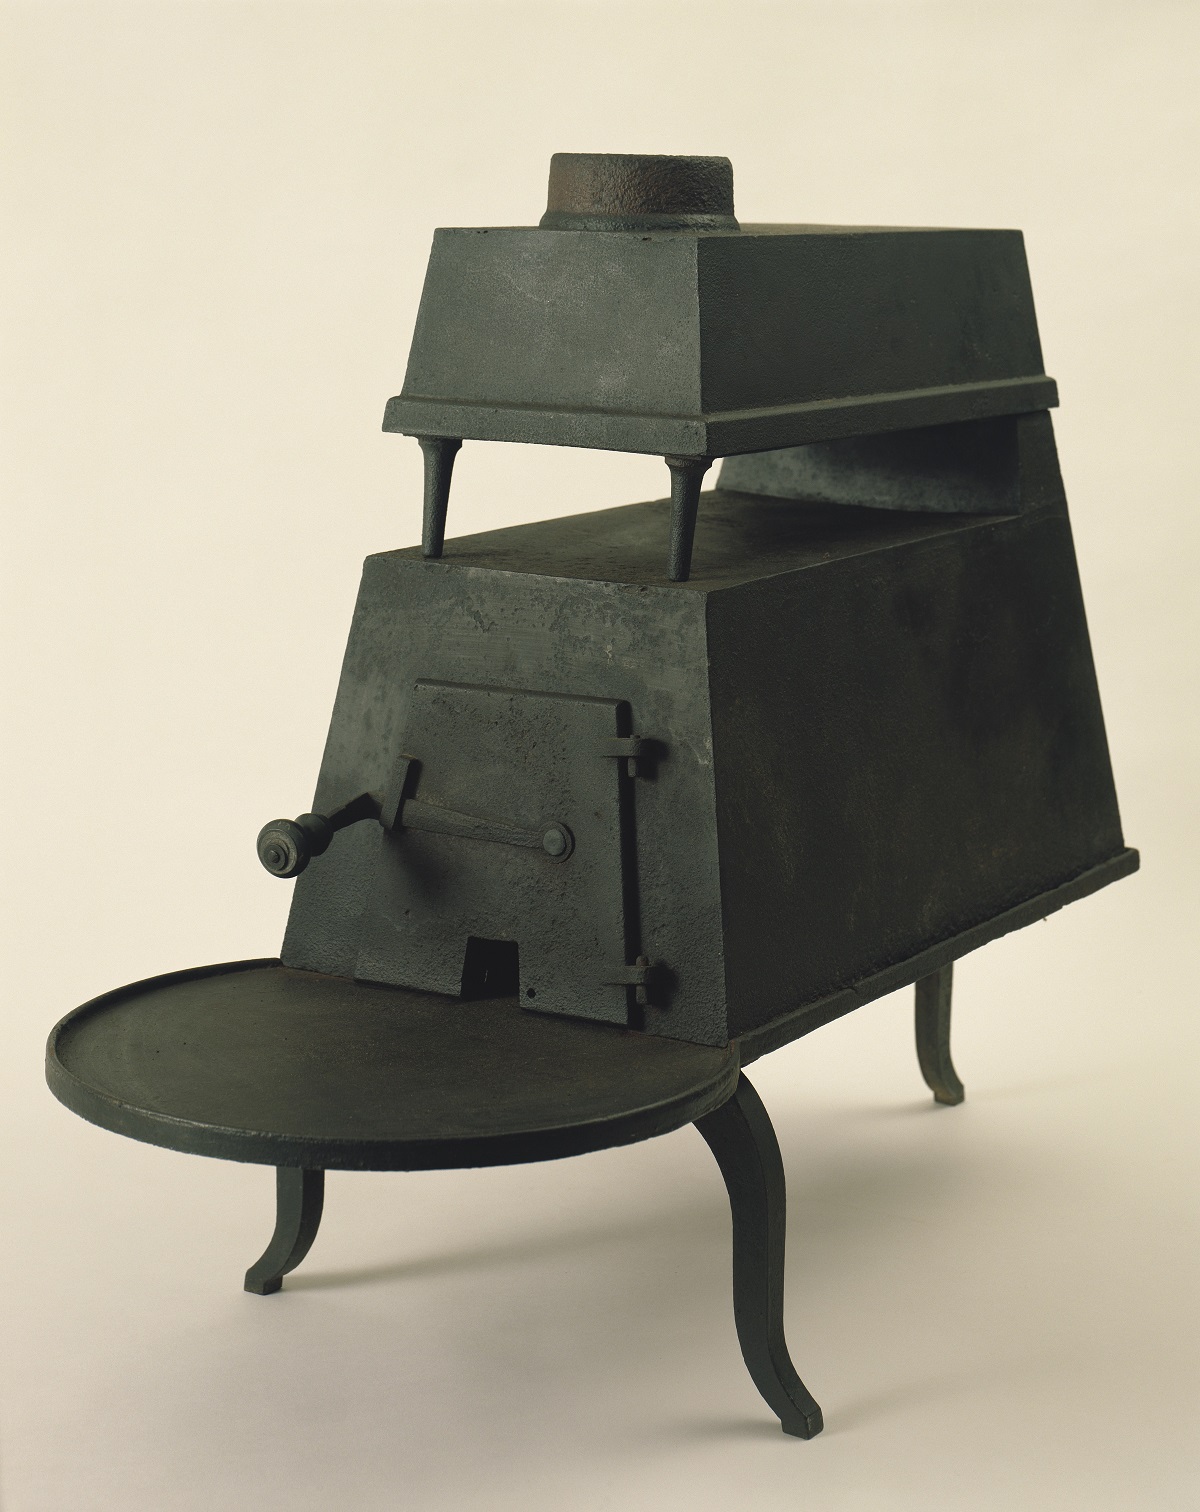 A black stove with a tray on top.